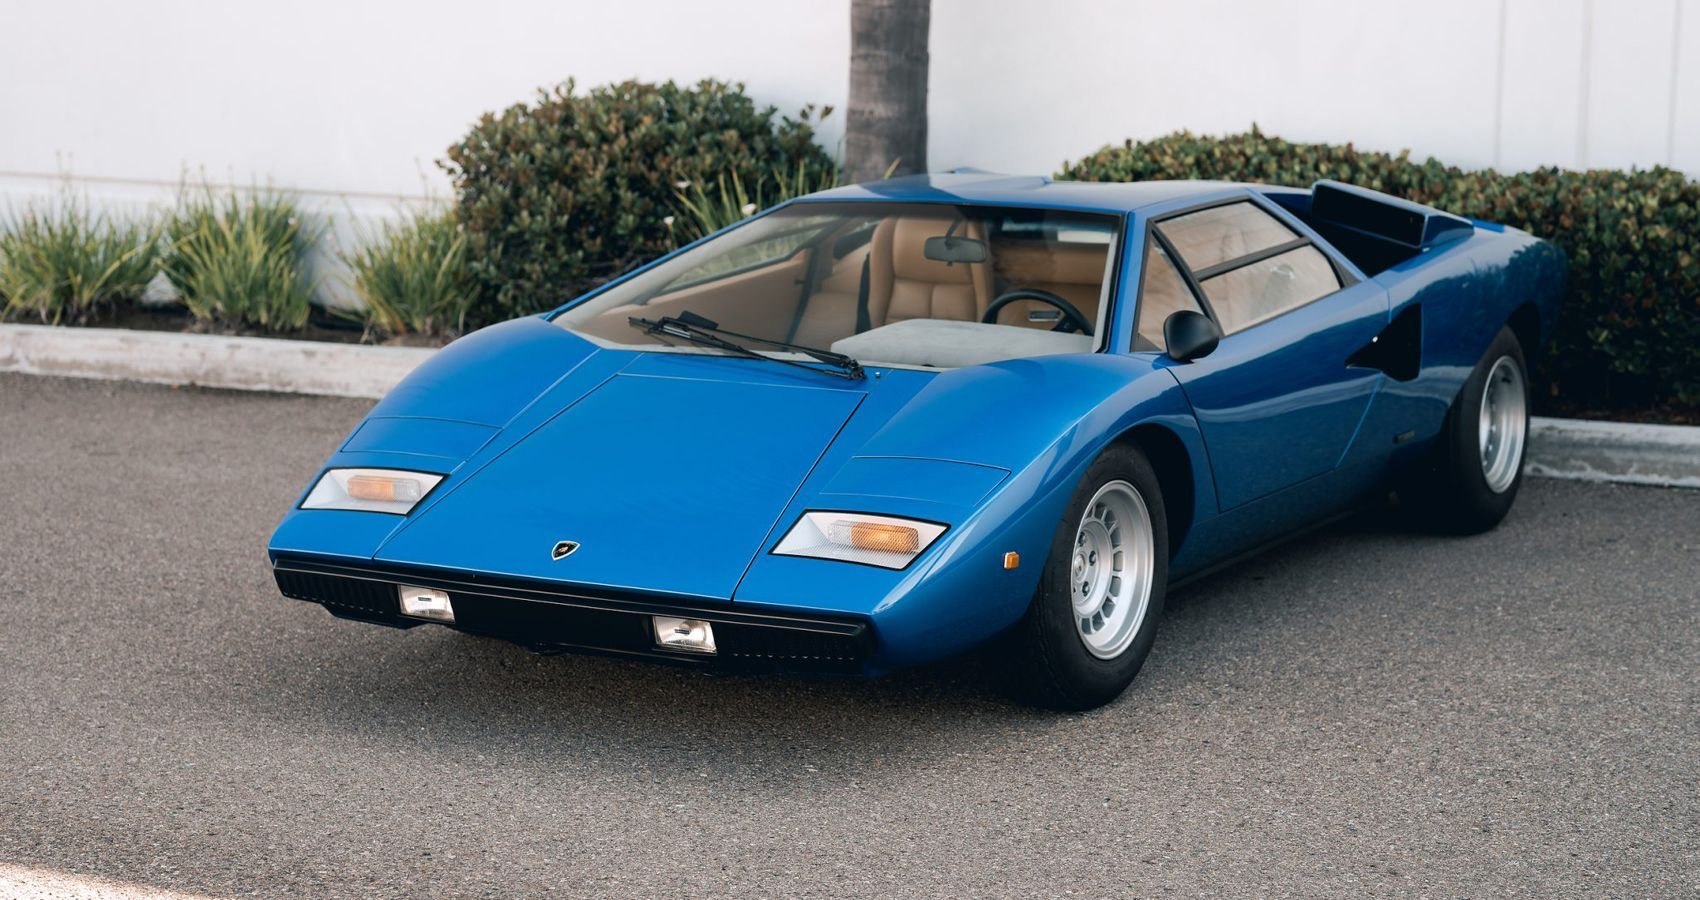 These Are The 5 Most Gorgeous Sports Cars Ever (5 Ugly Ones That Are Way Faster)